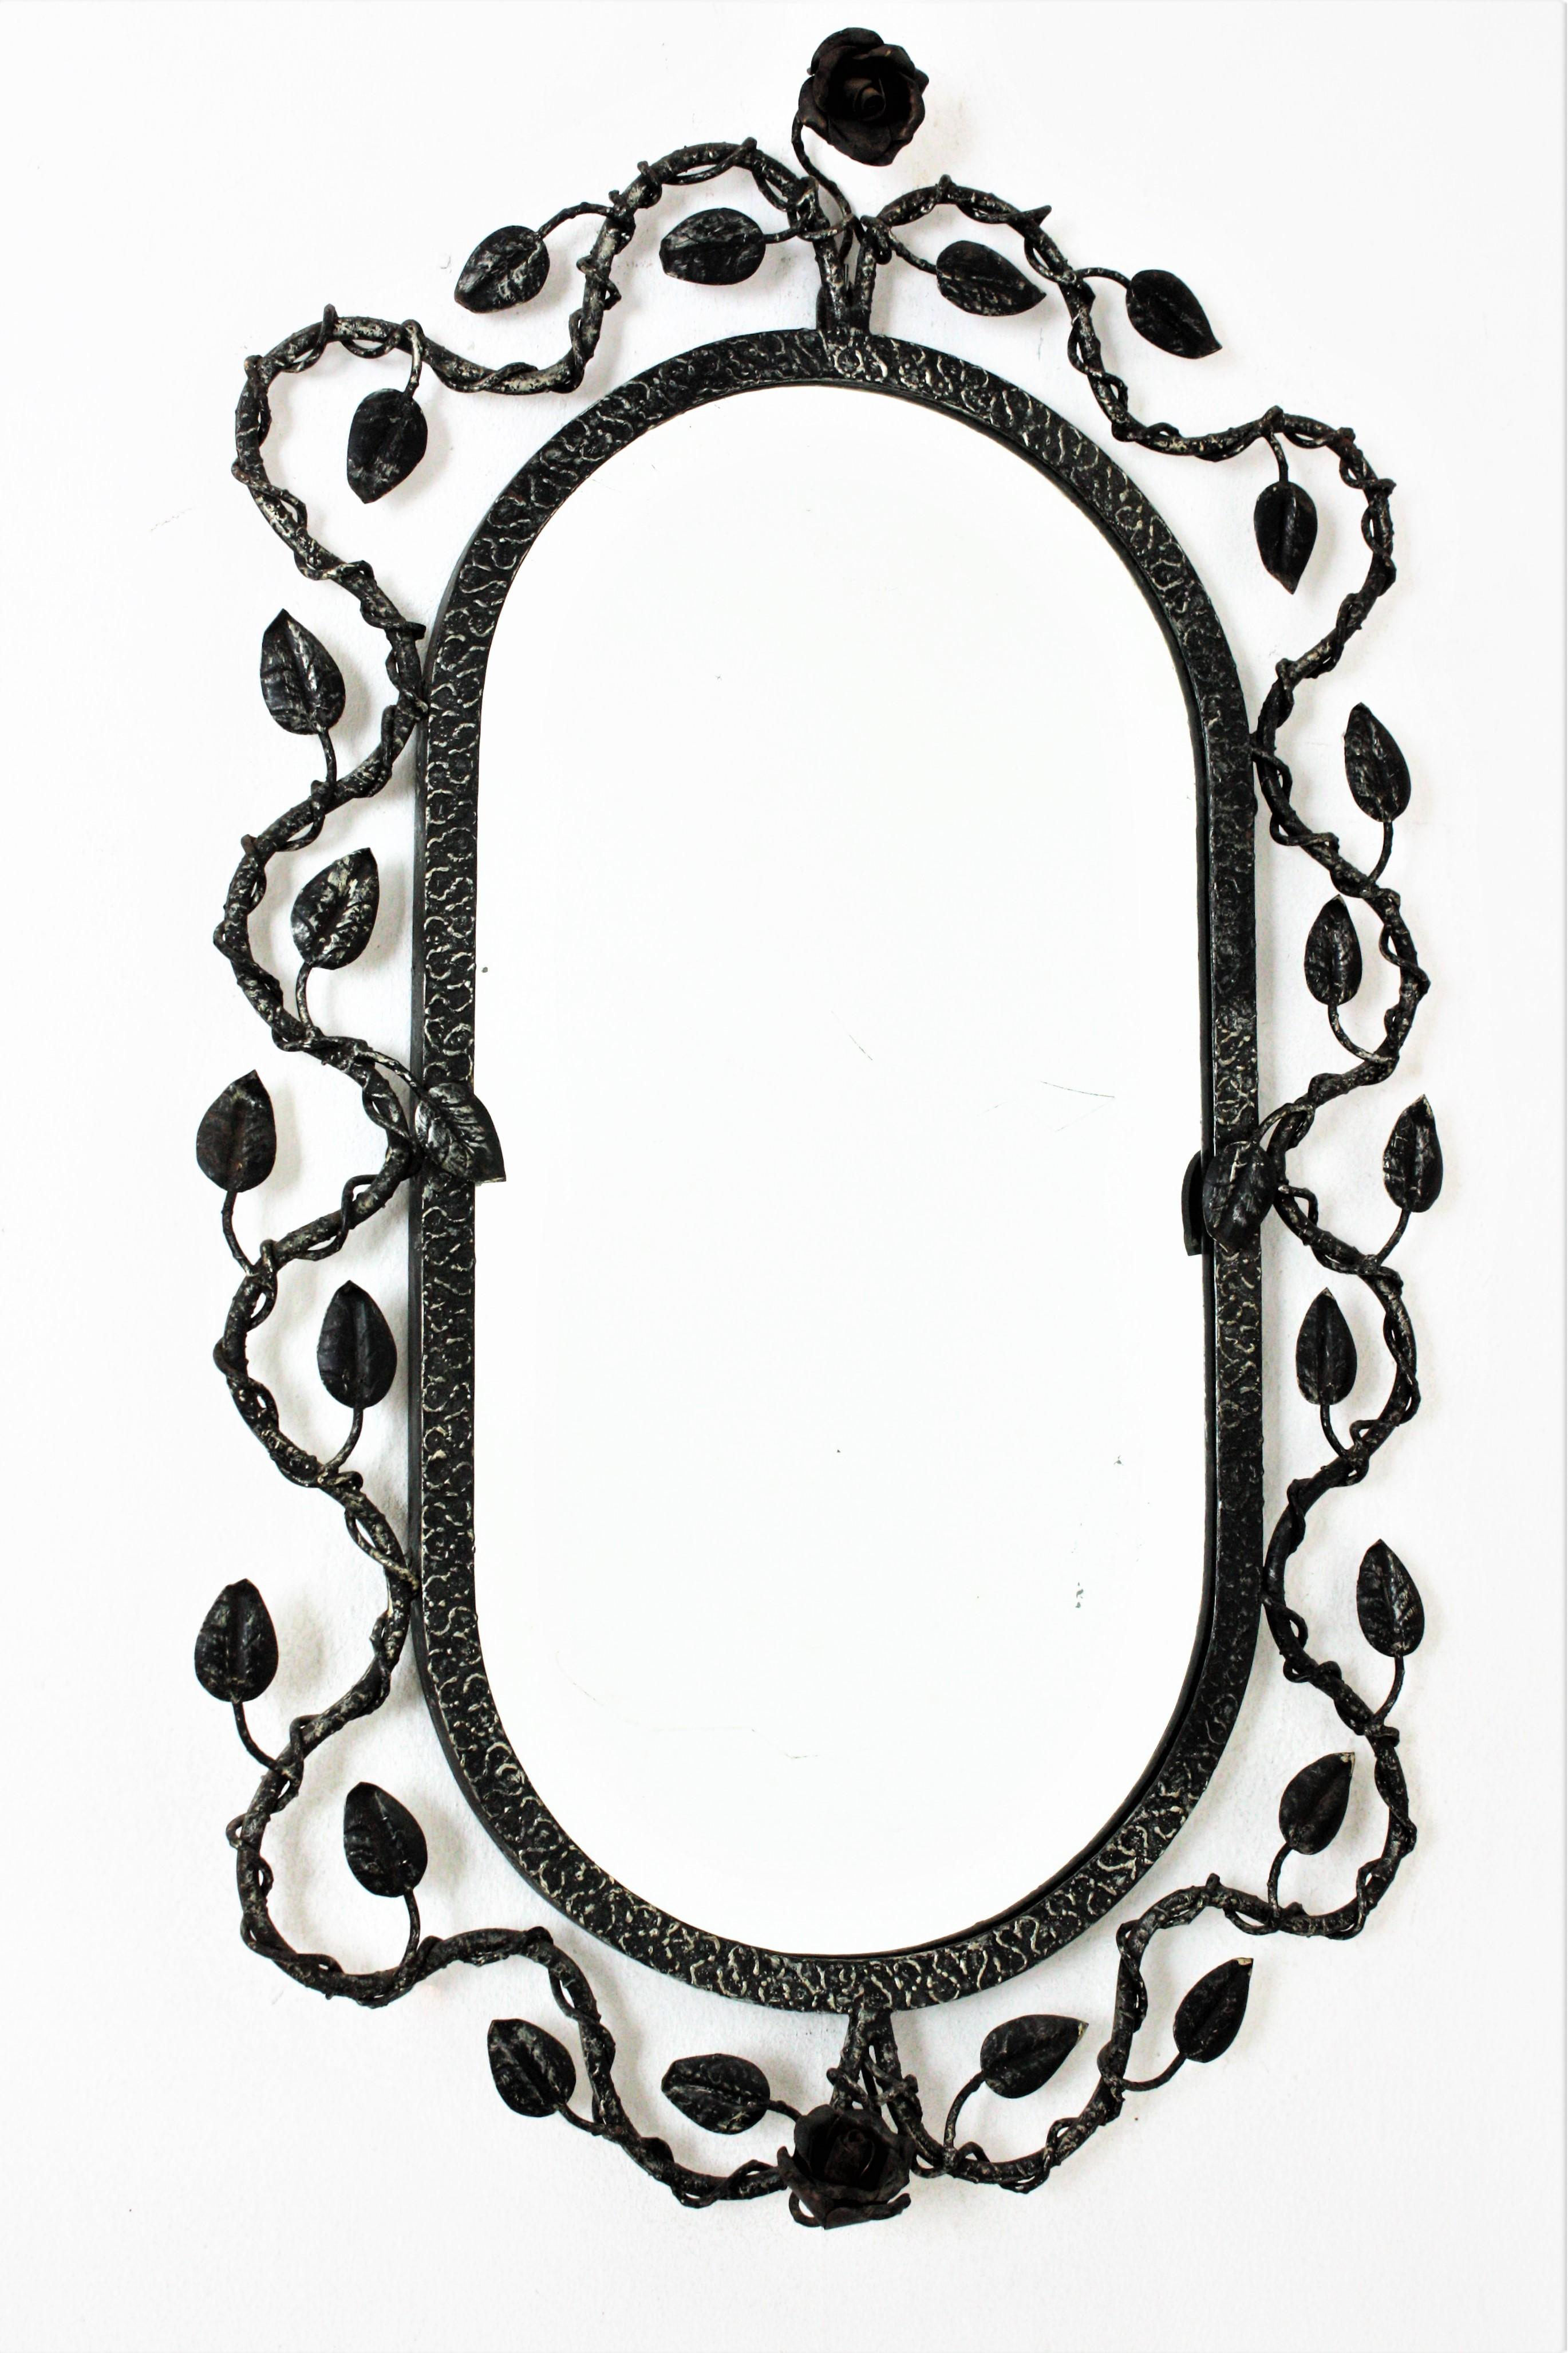 Foliage Floral Oval Mirror in Silver Silver Patinated Hand Forged Iron, Spain, 1950s.
Hand wrought iron oval sunburst wall mirror with foliage frame , patinated finish and floral accents.
The frame features and intrincate of branches and leaves with